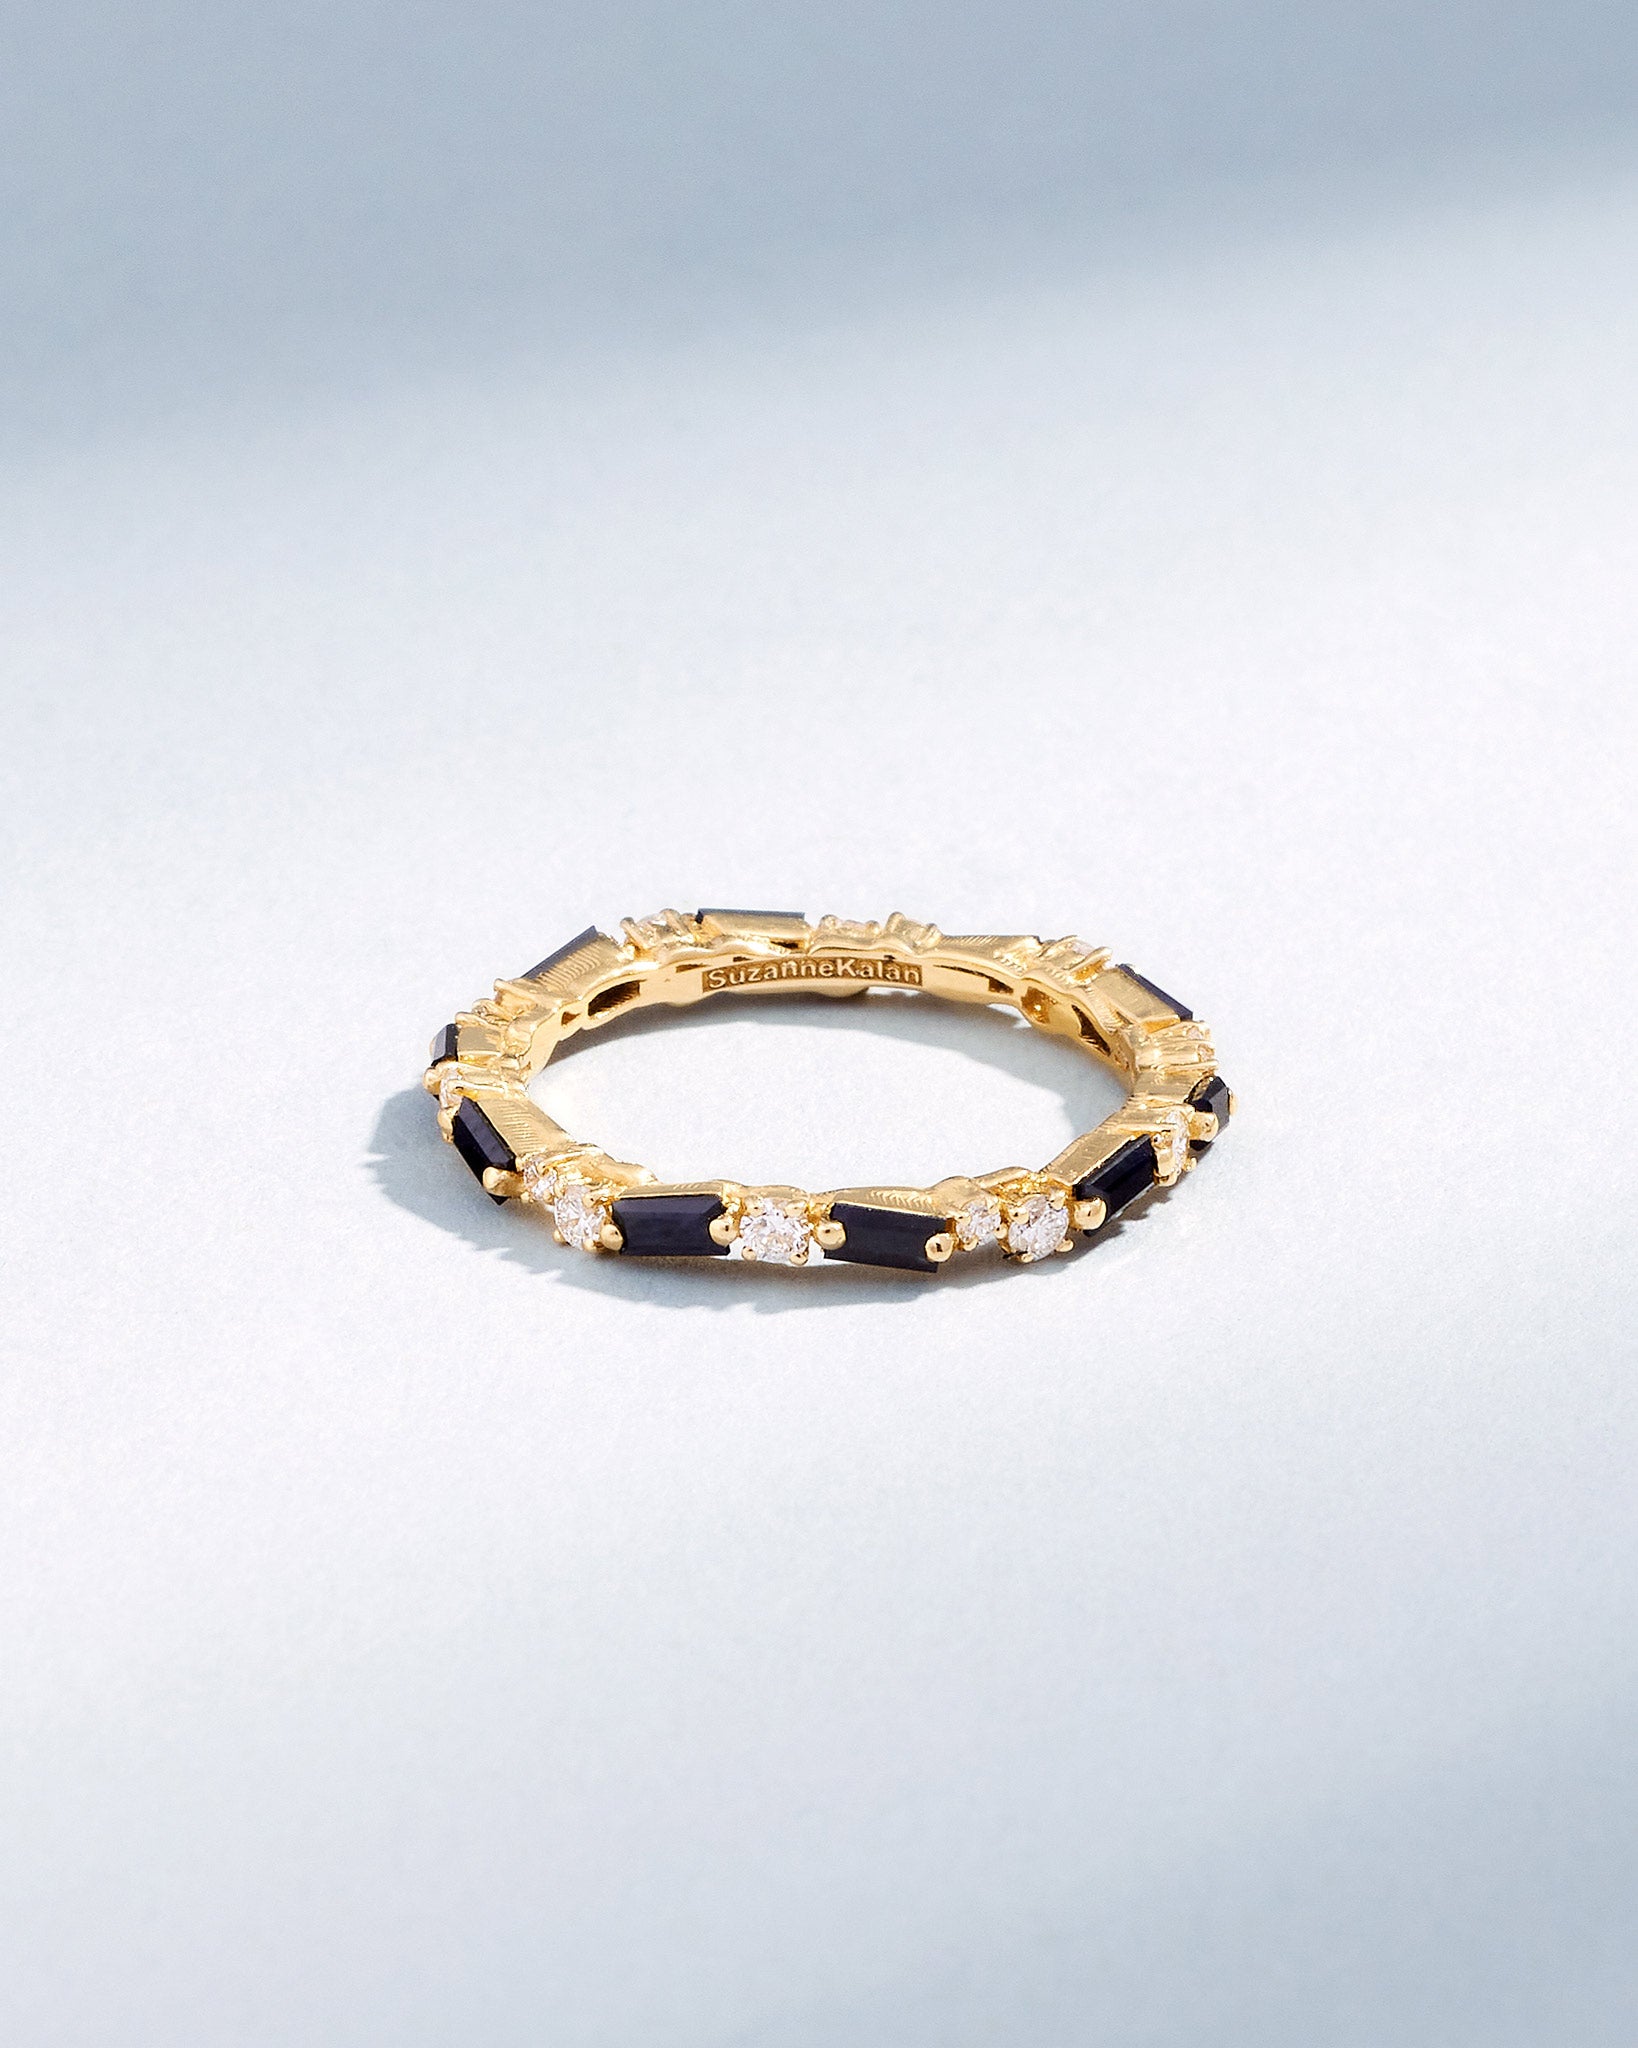 Suzanne Kalan Thin Mix Black Sapphire Eternity Band in 18k yellow gold